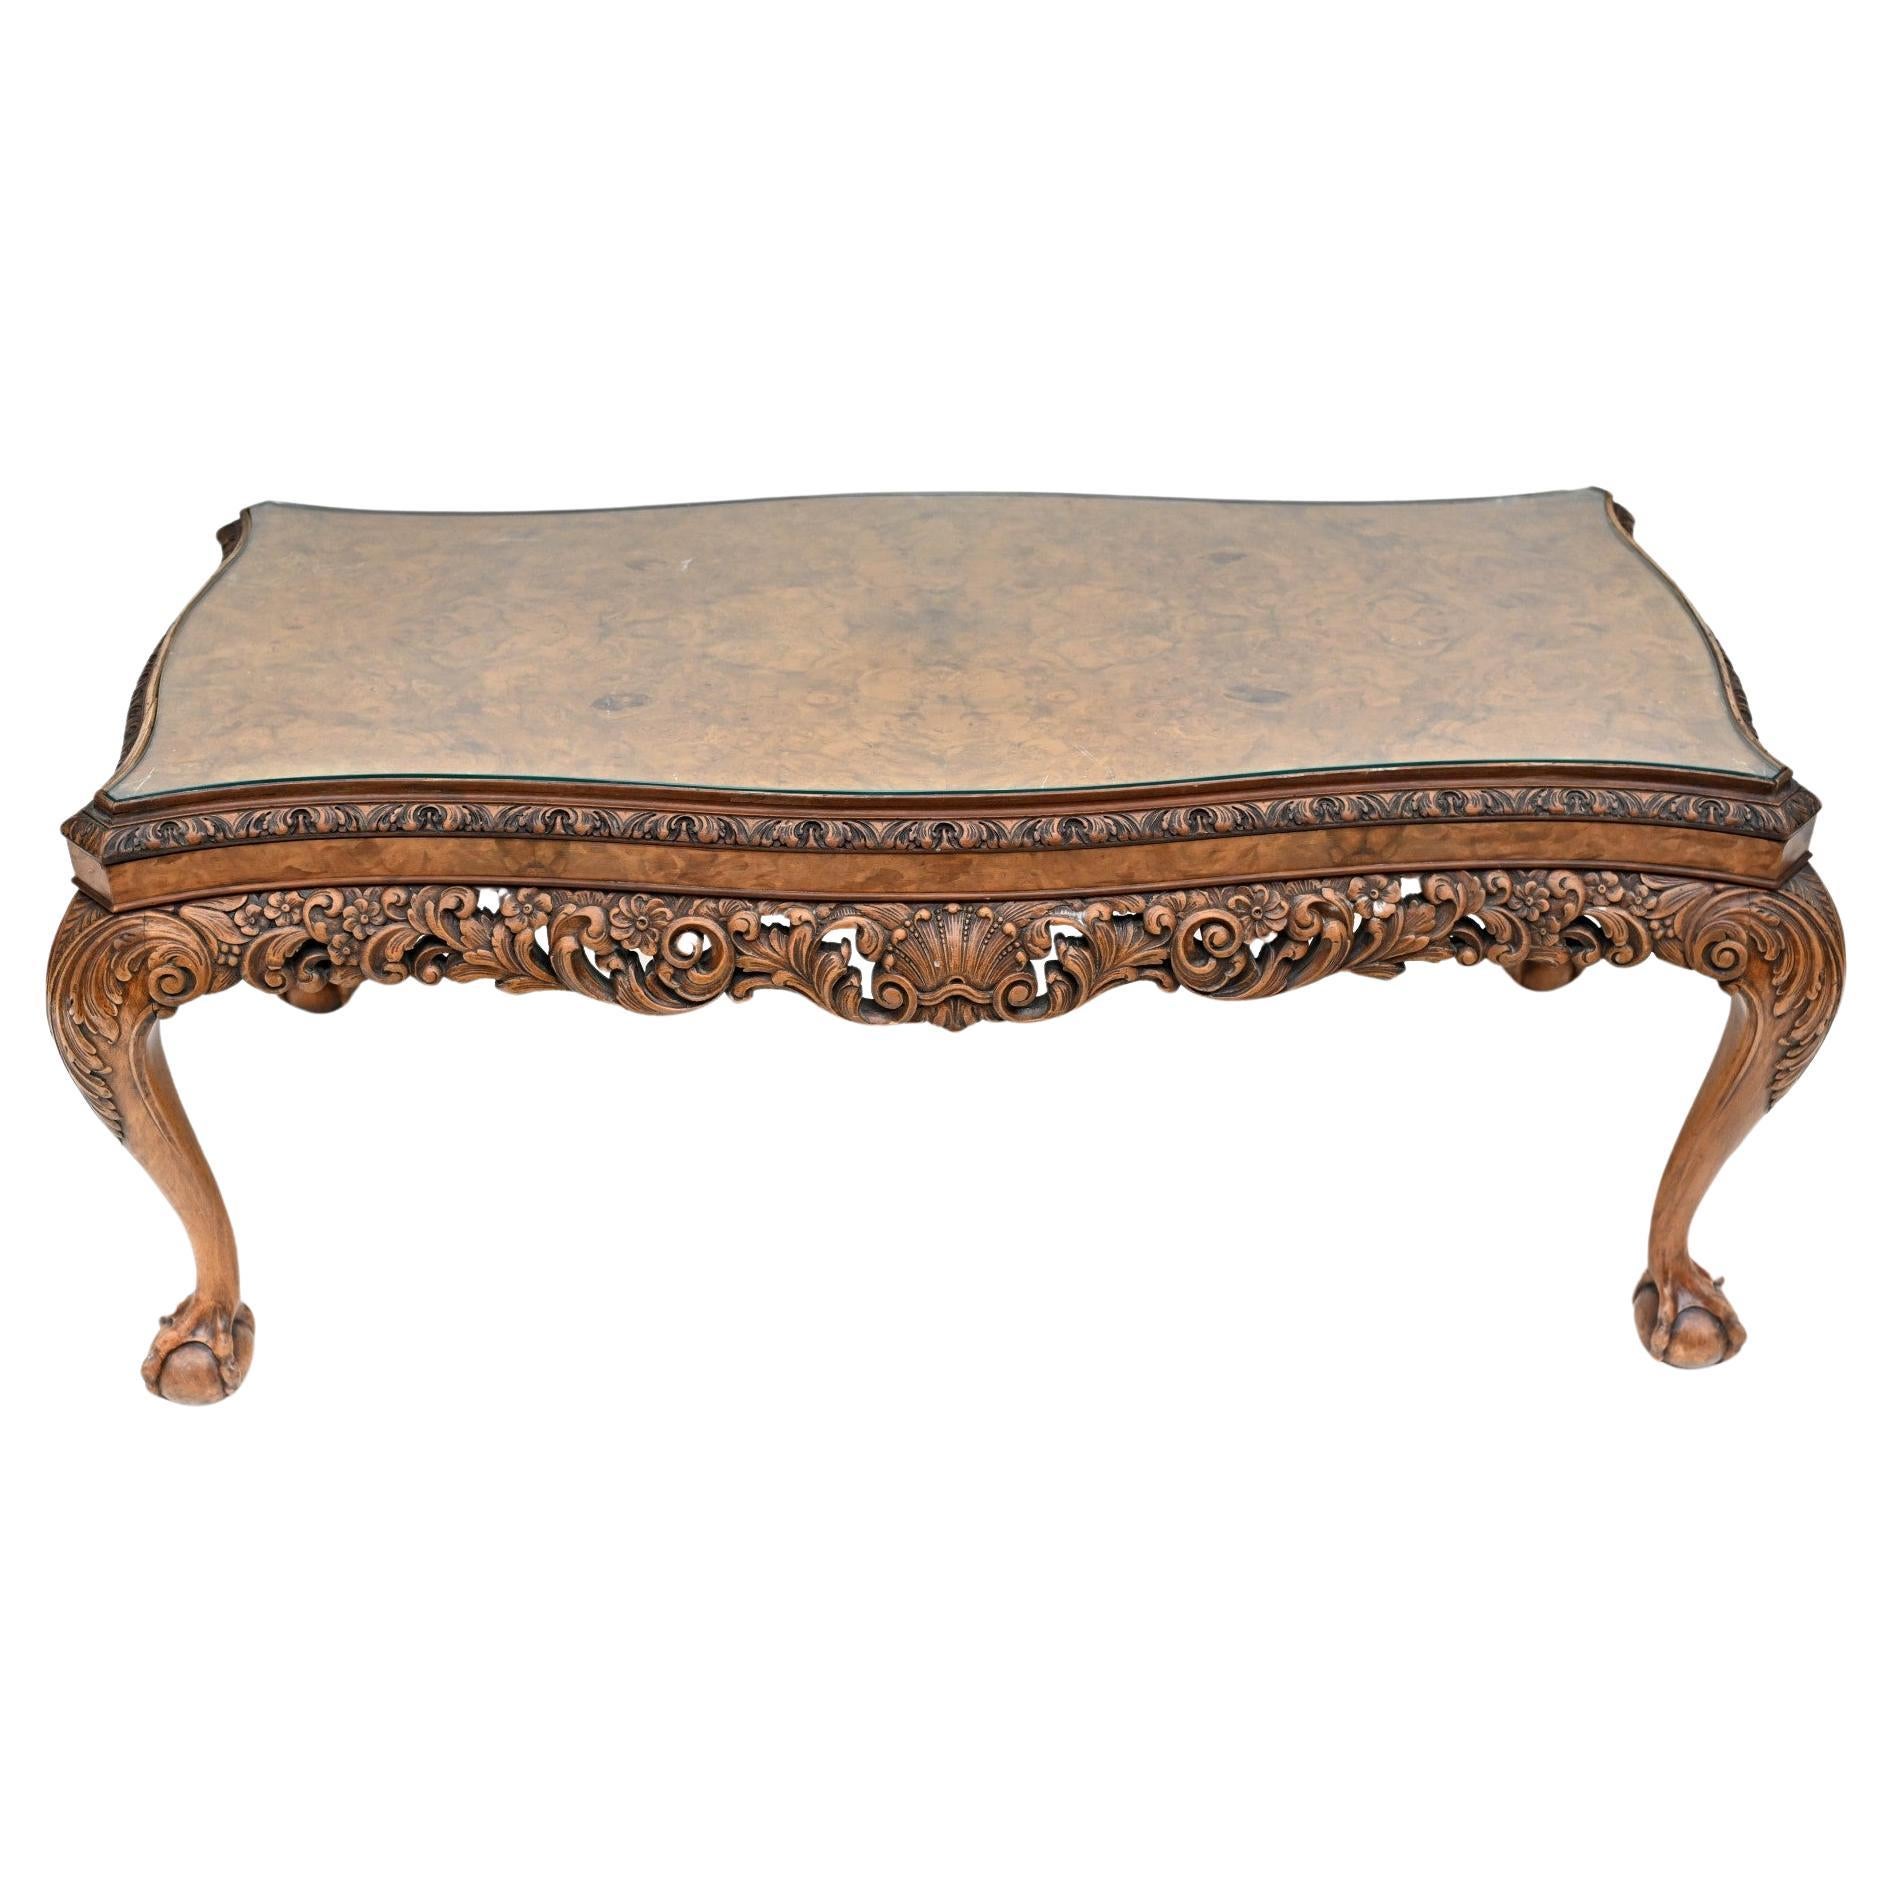 Antique Epstein Coffee Table Walnut Carved